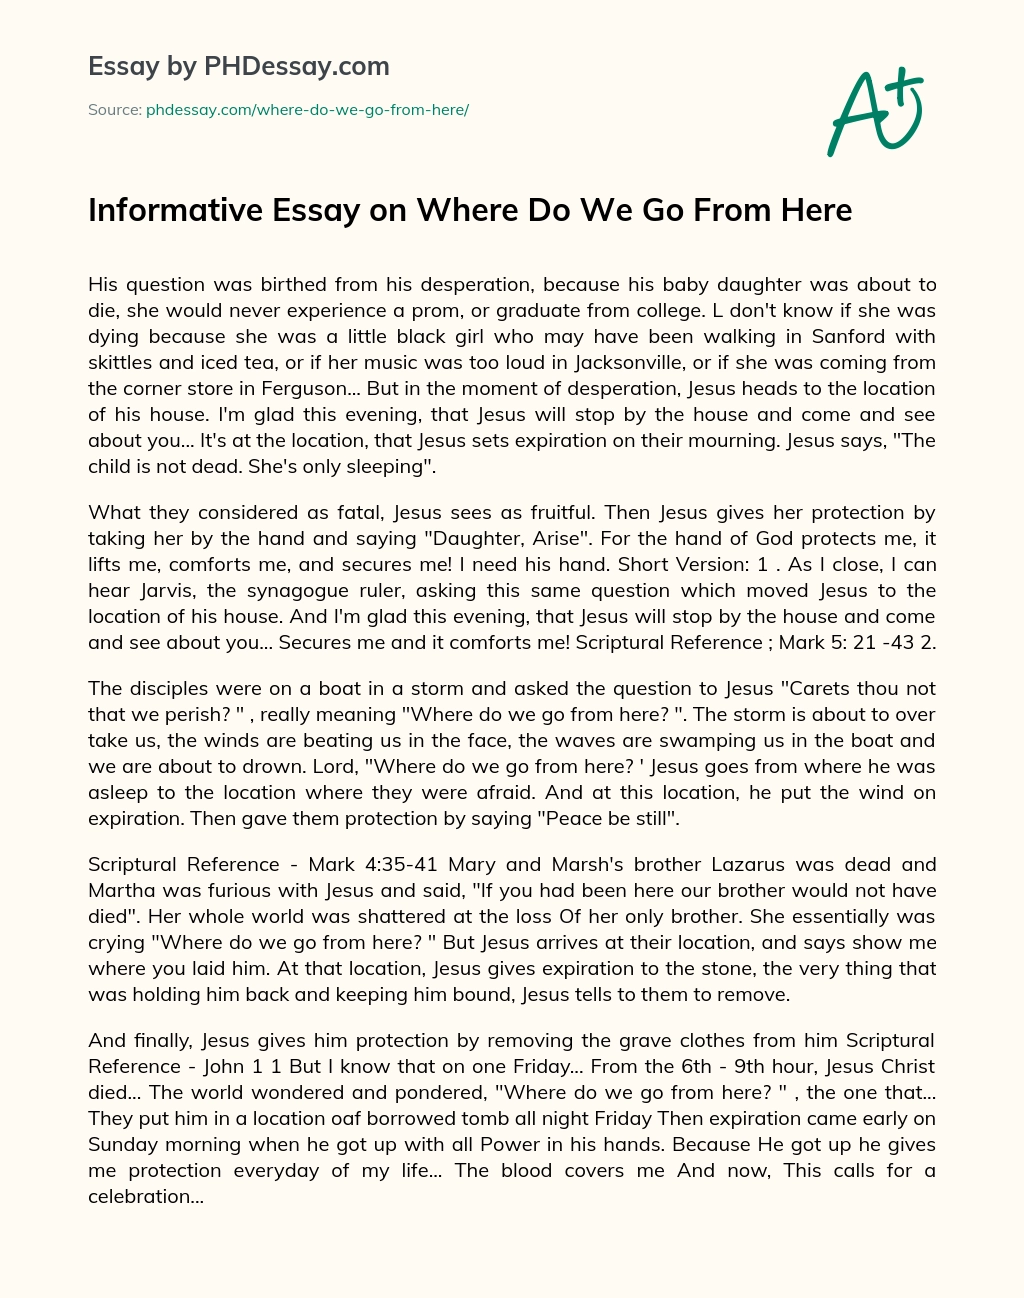 Informative Essay on Where Do We Go From Here essay